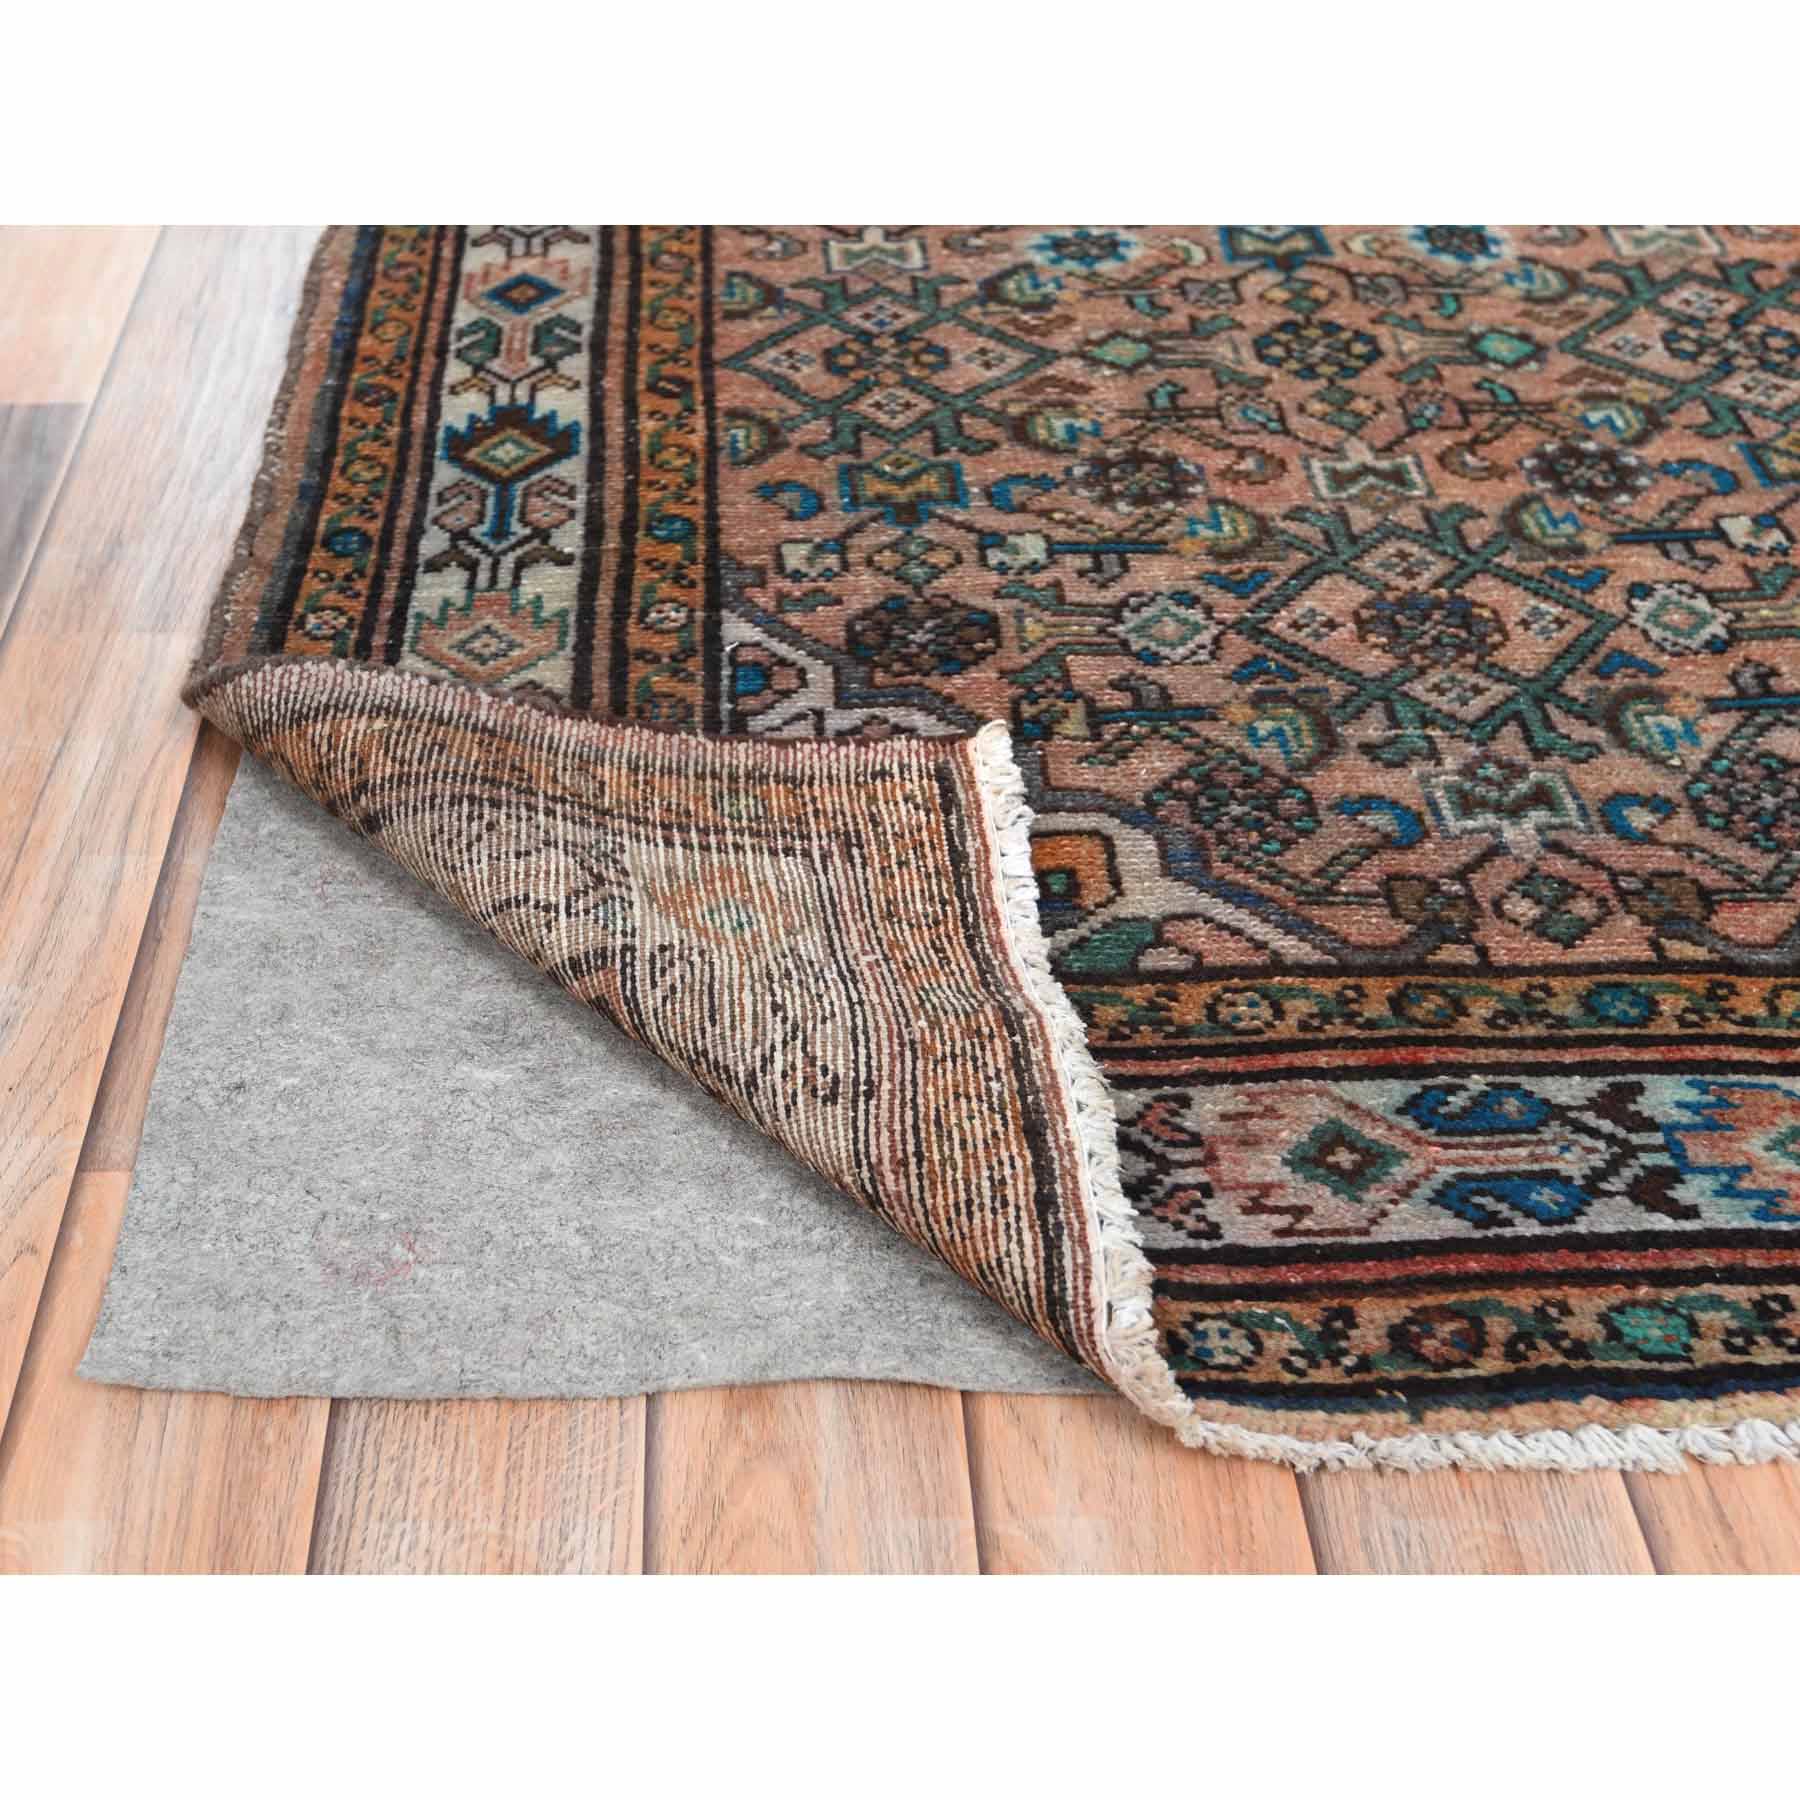 Overdyed-Vintage-Hand-Knotted-Rug-309730